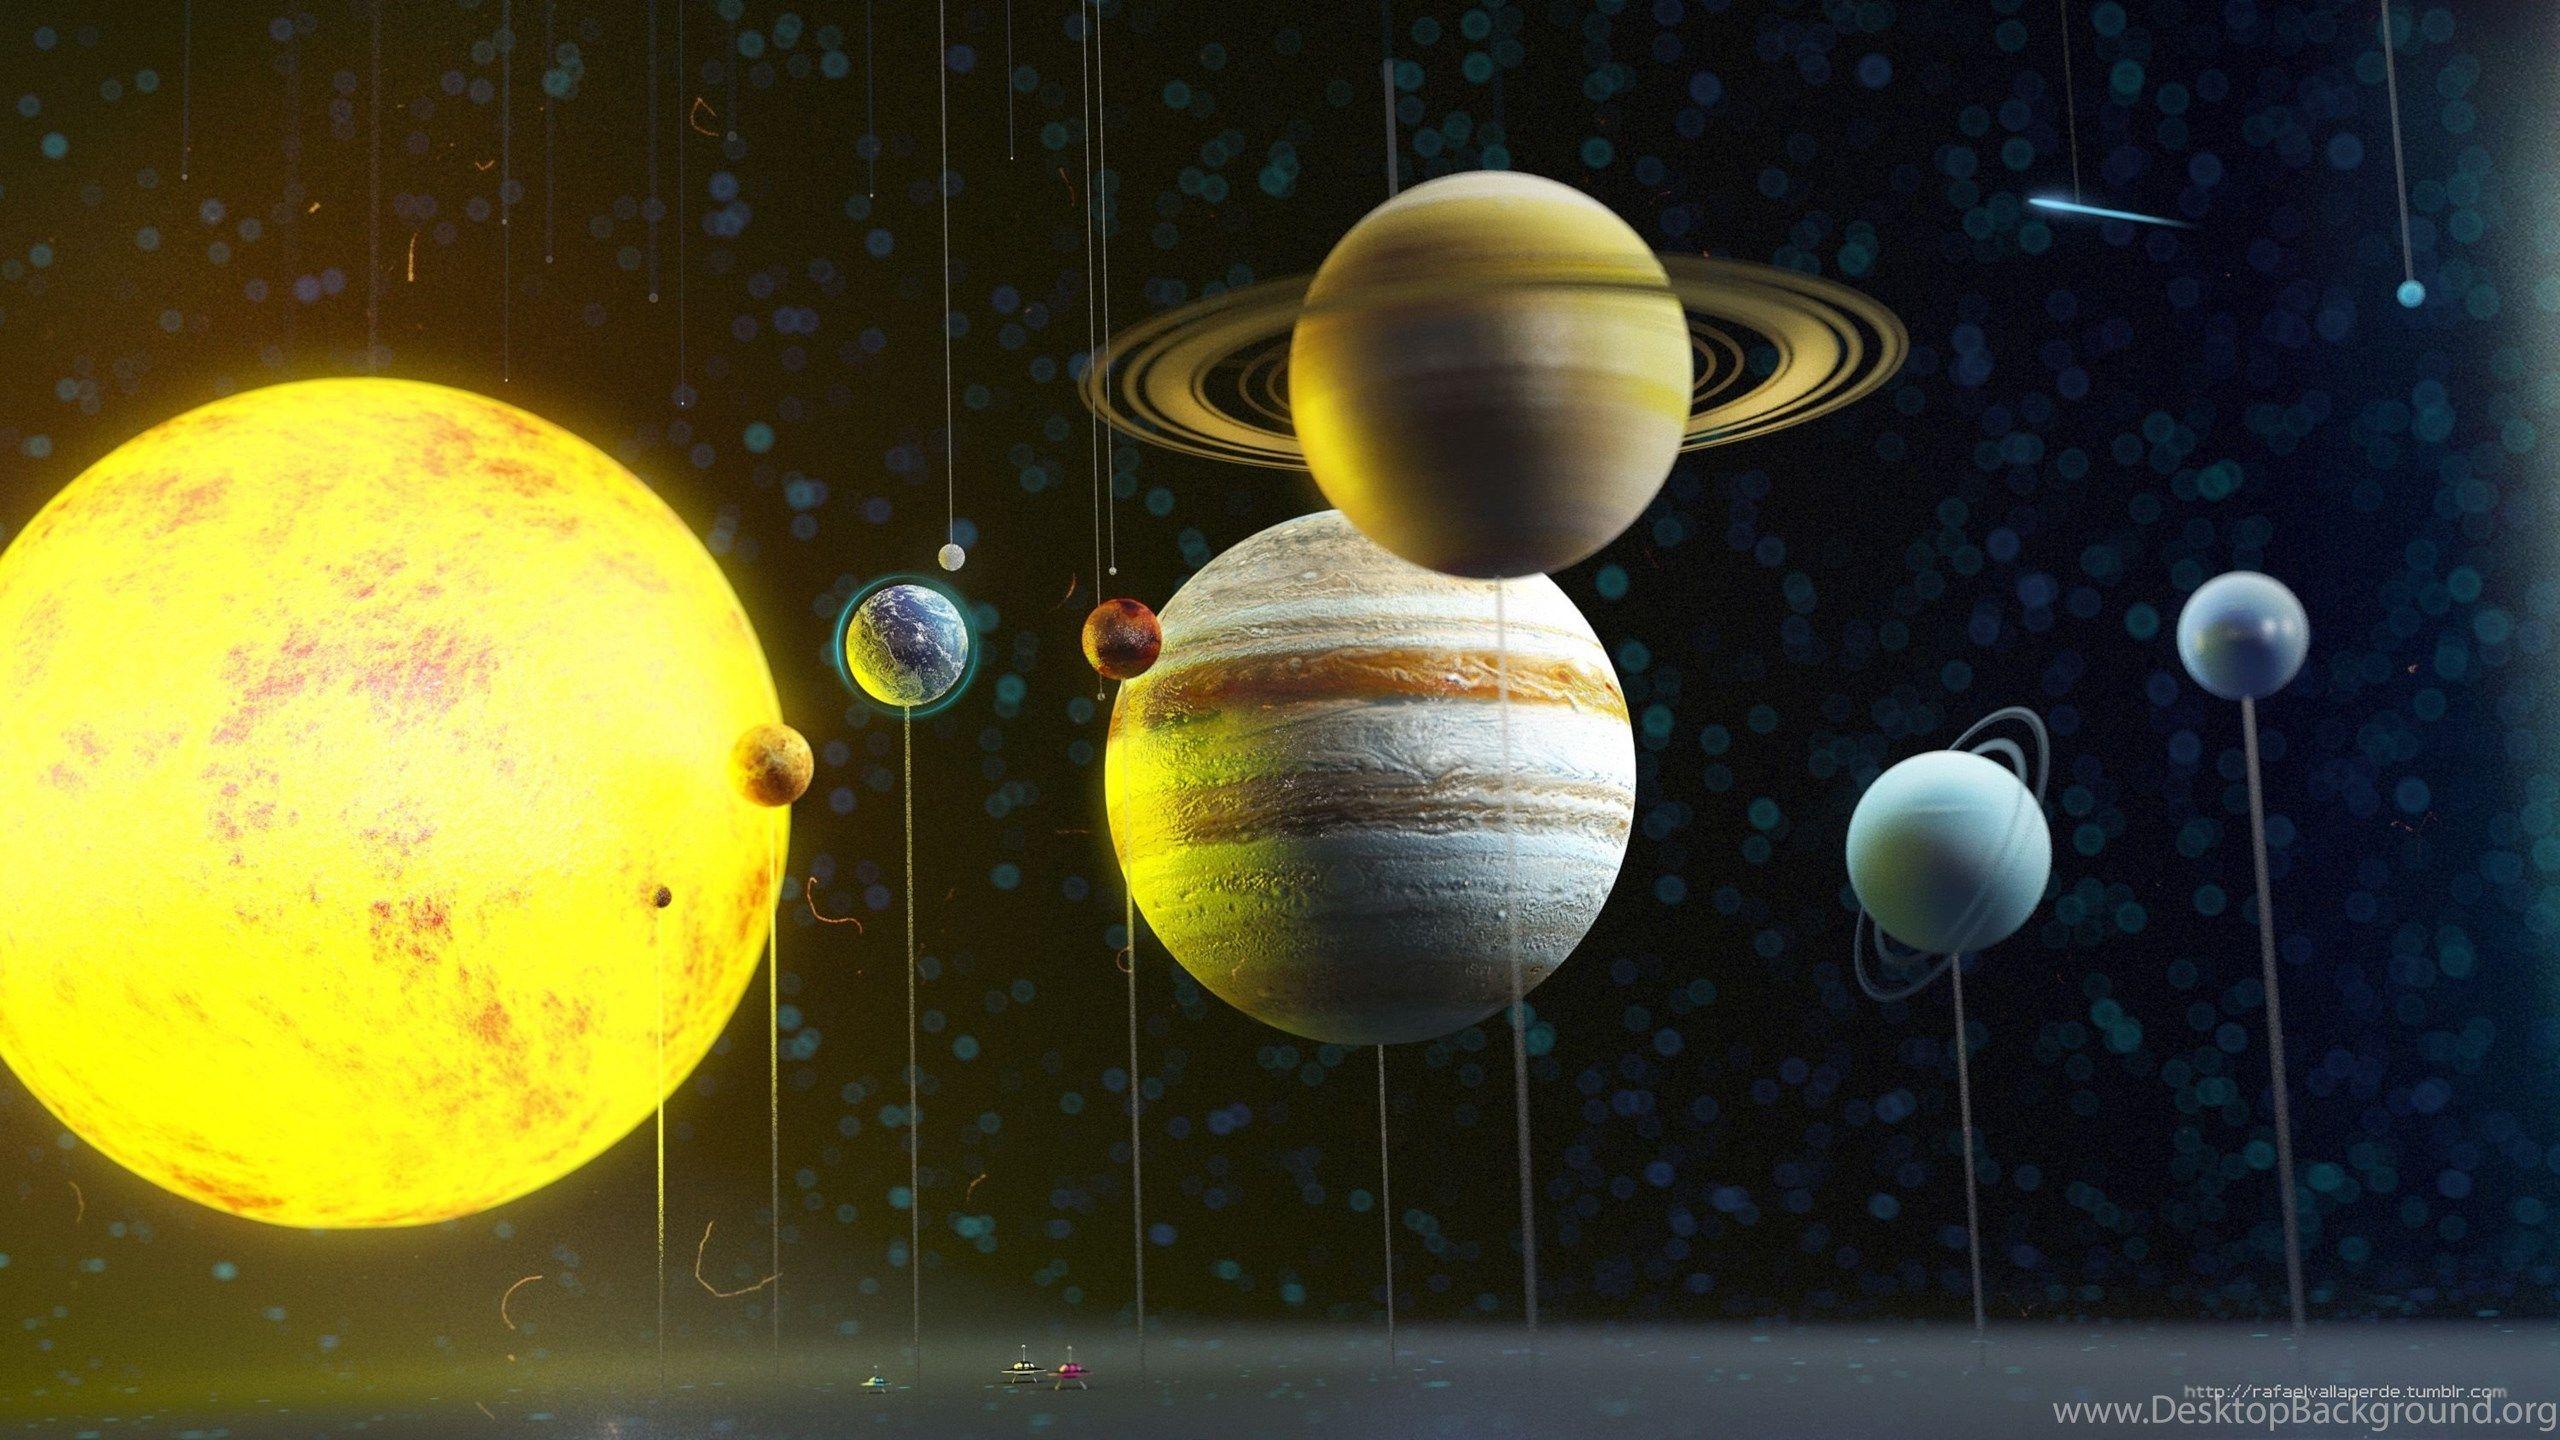 NASA Solar System Wallpapers - Top Free NASA Solar System Backgrounds